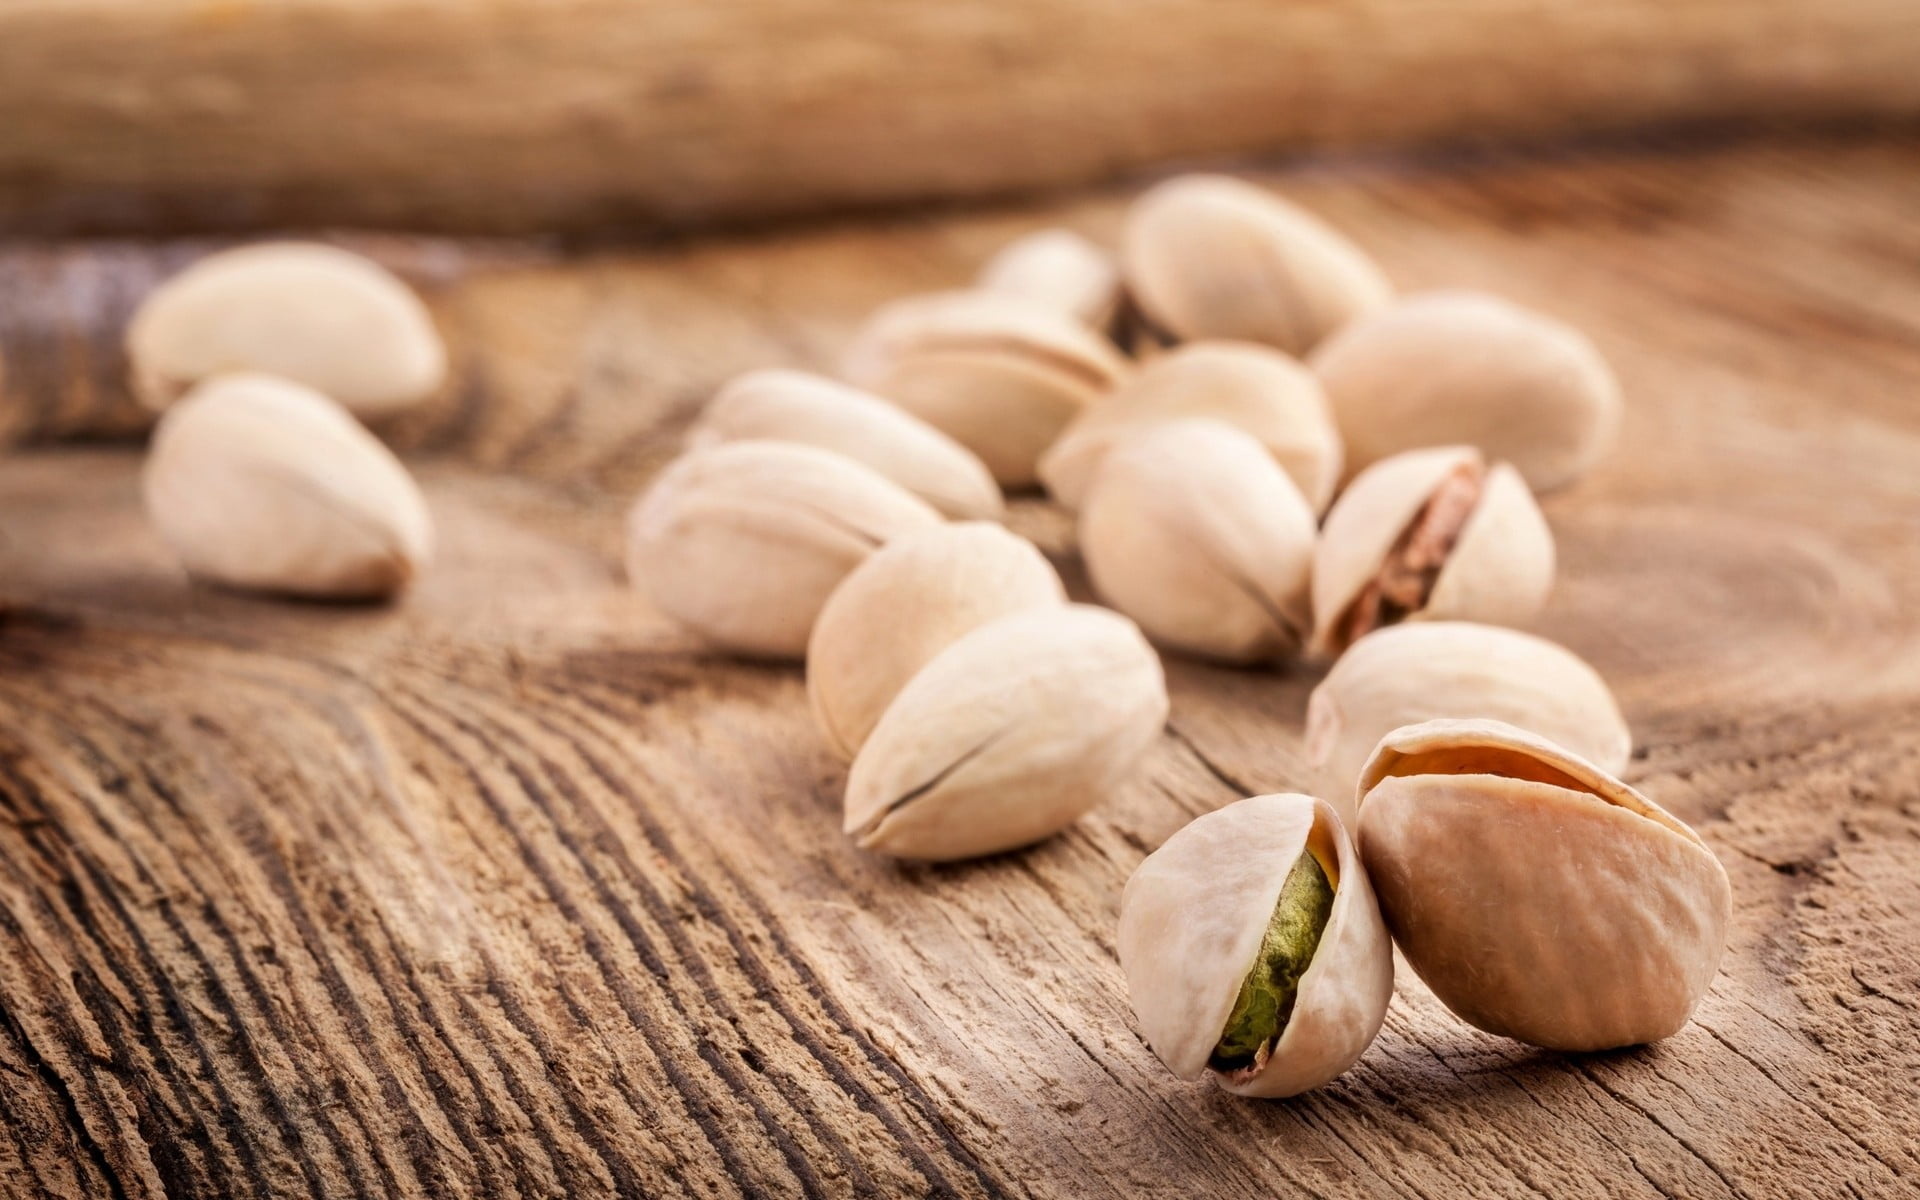 Pistachios beauty, Nutty delight, Food photography, Delicious snack, 1920x1200 HD Desktop